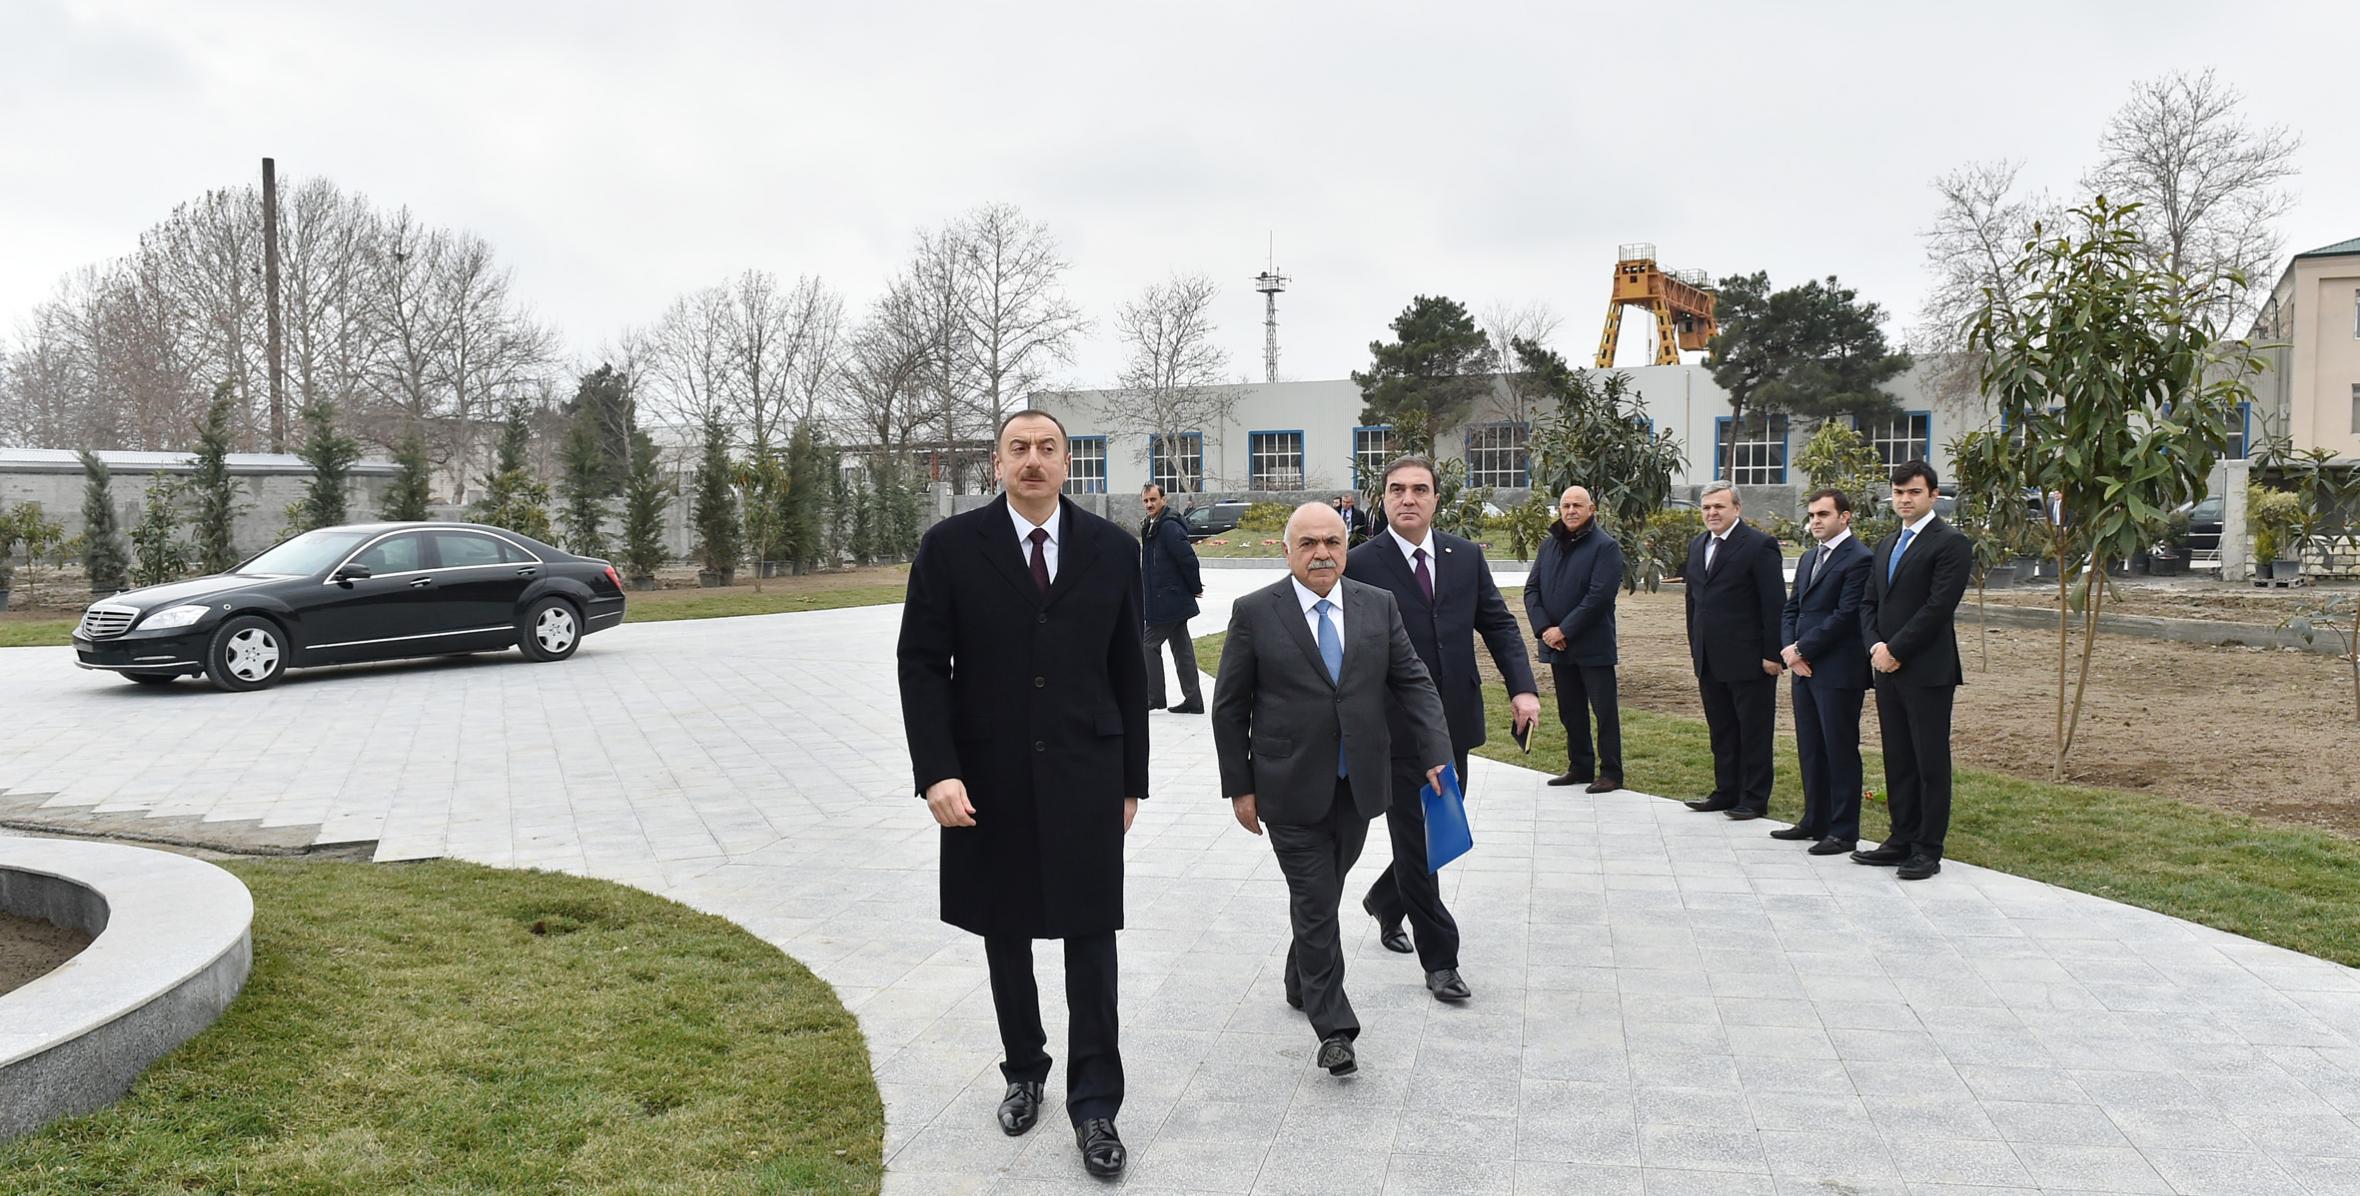 Ilham Aliyev reviewed the progress of construction at Aghsaray hotel in Mingachevir